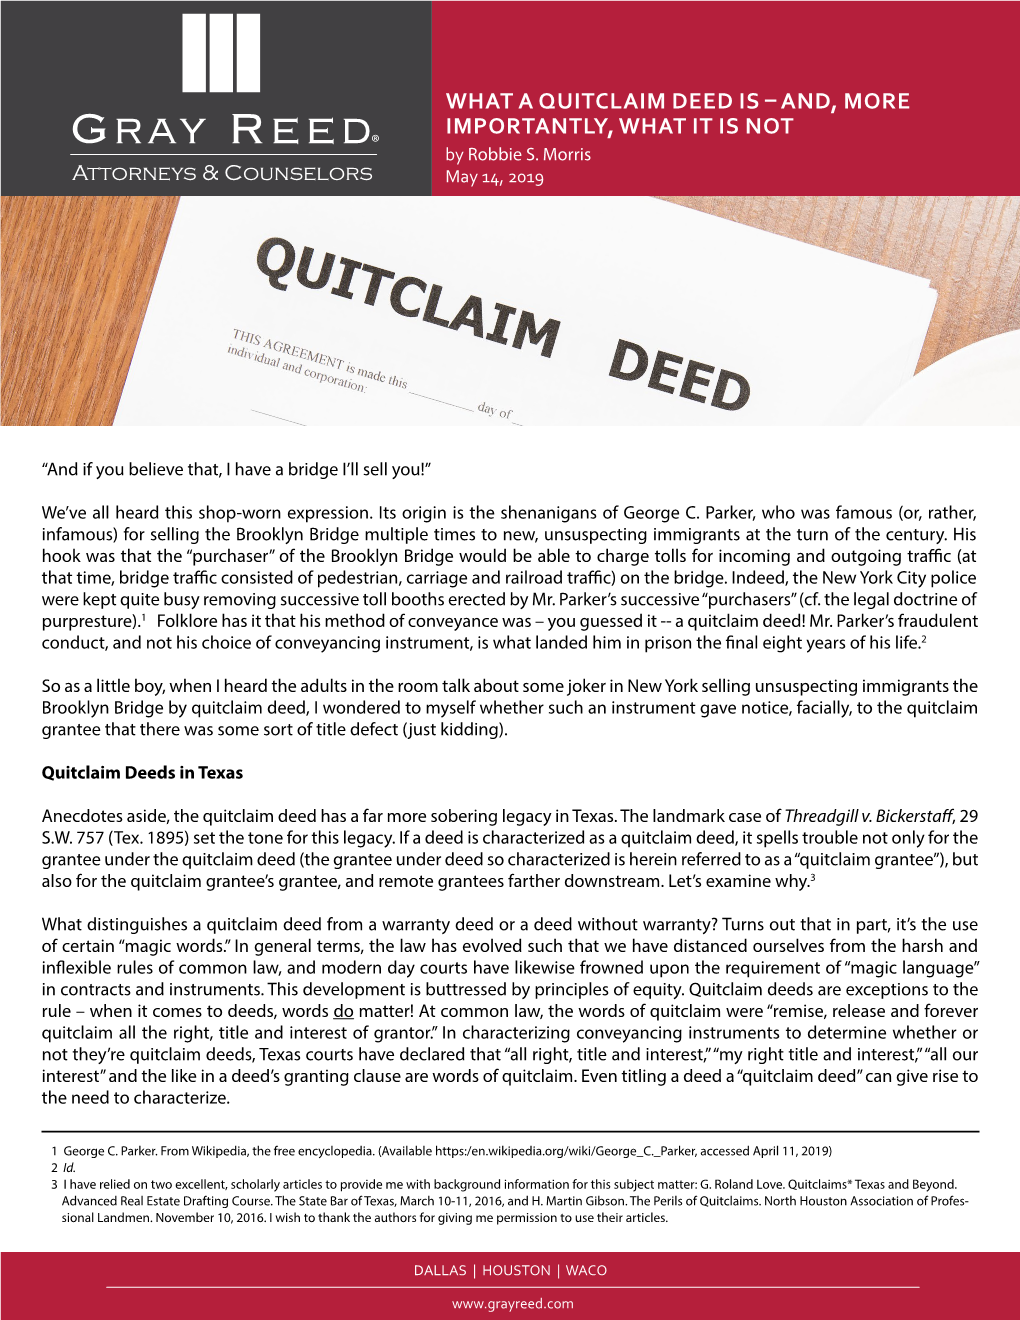 WHAT a QUITCLAIM DEED IS – AND, MORE IMPORTANTLY, WHAT IT IS NOT ® by Robbie S